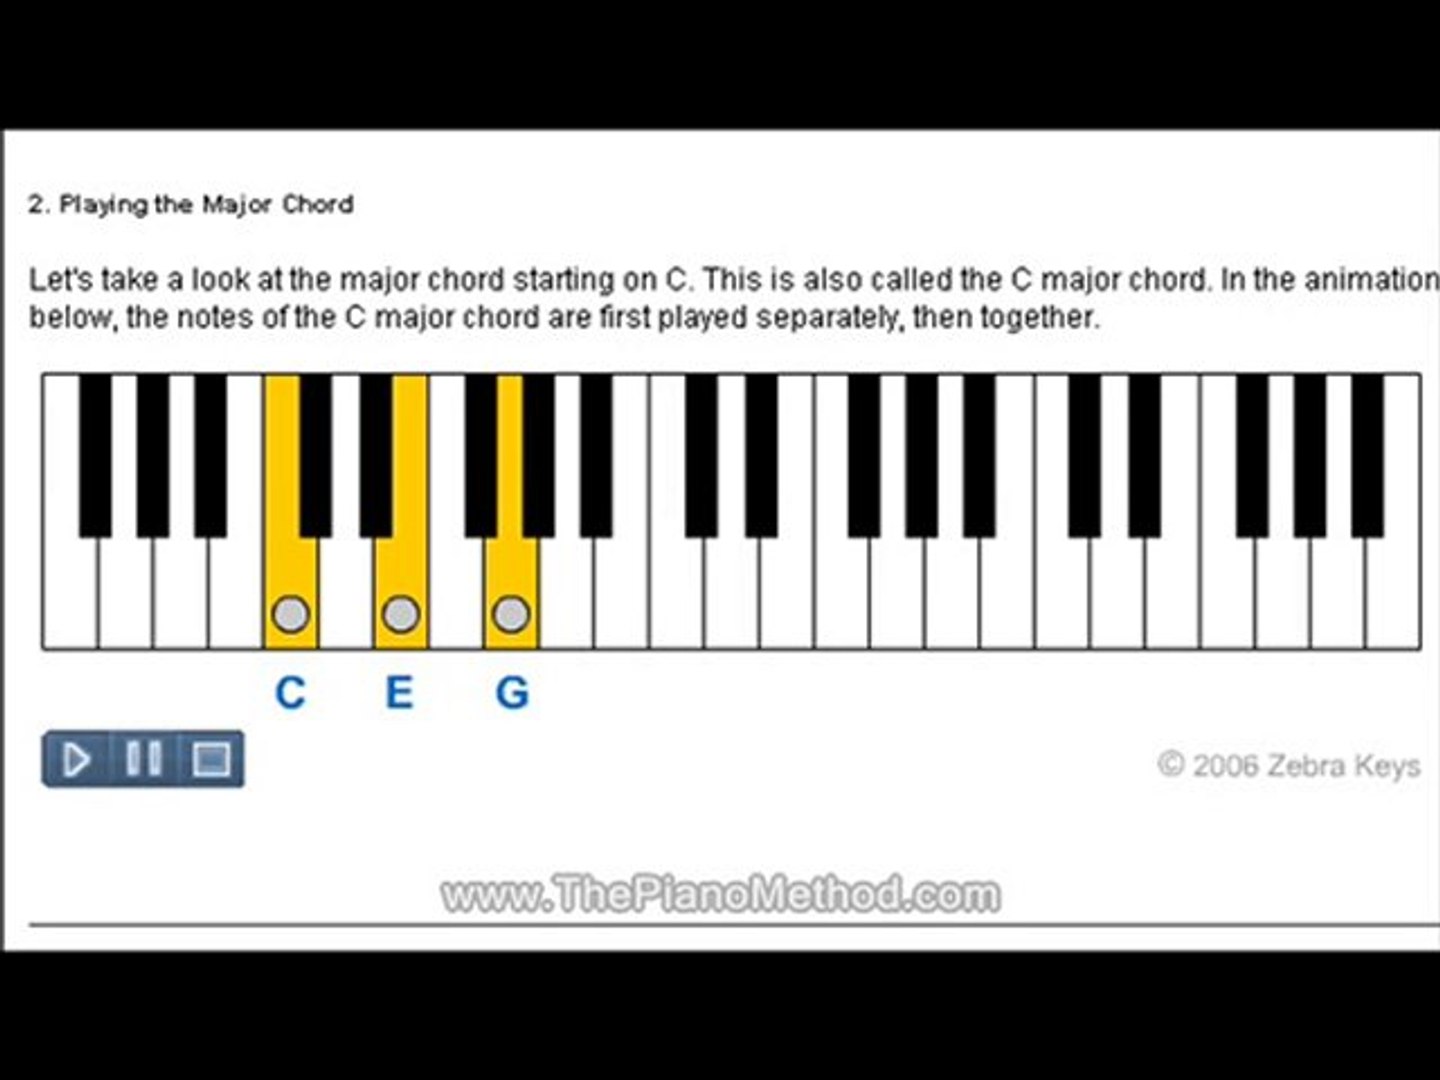 play piano chords online - video Dailymotion